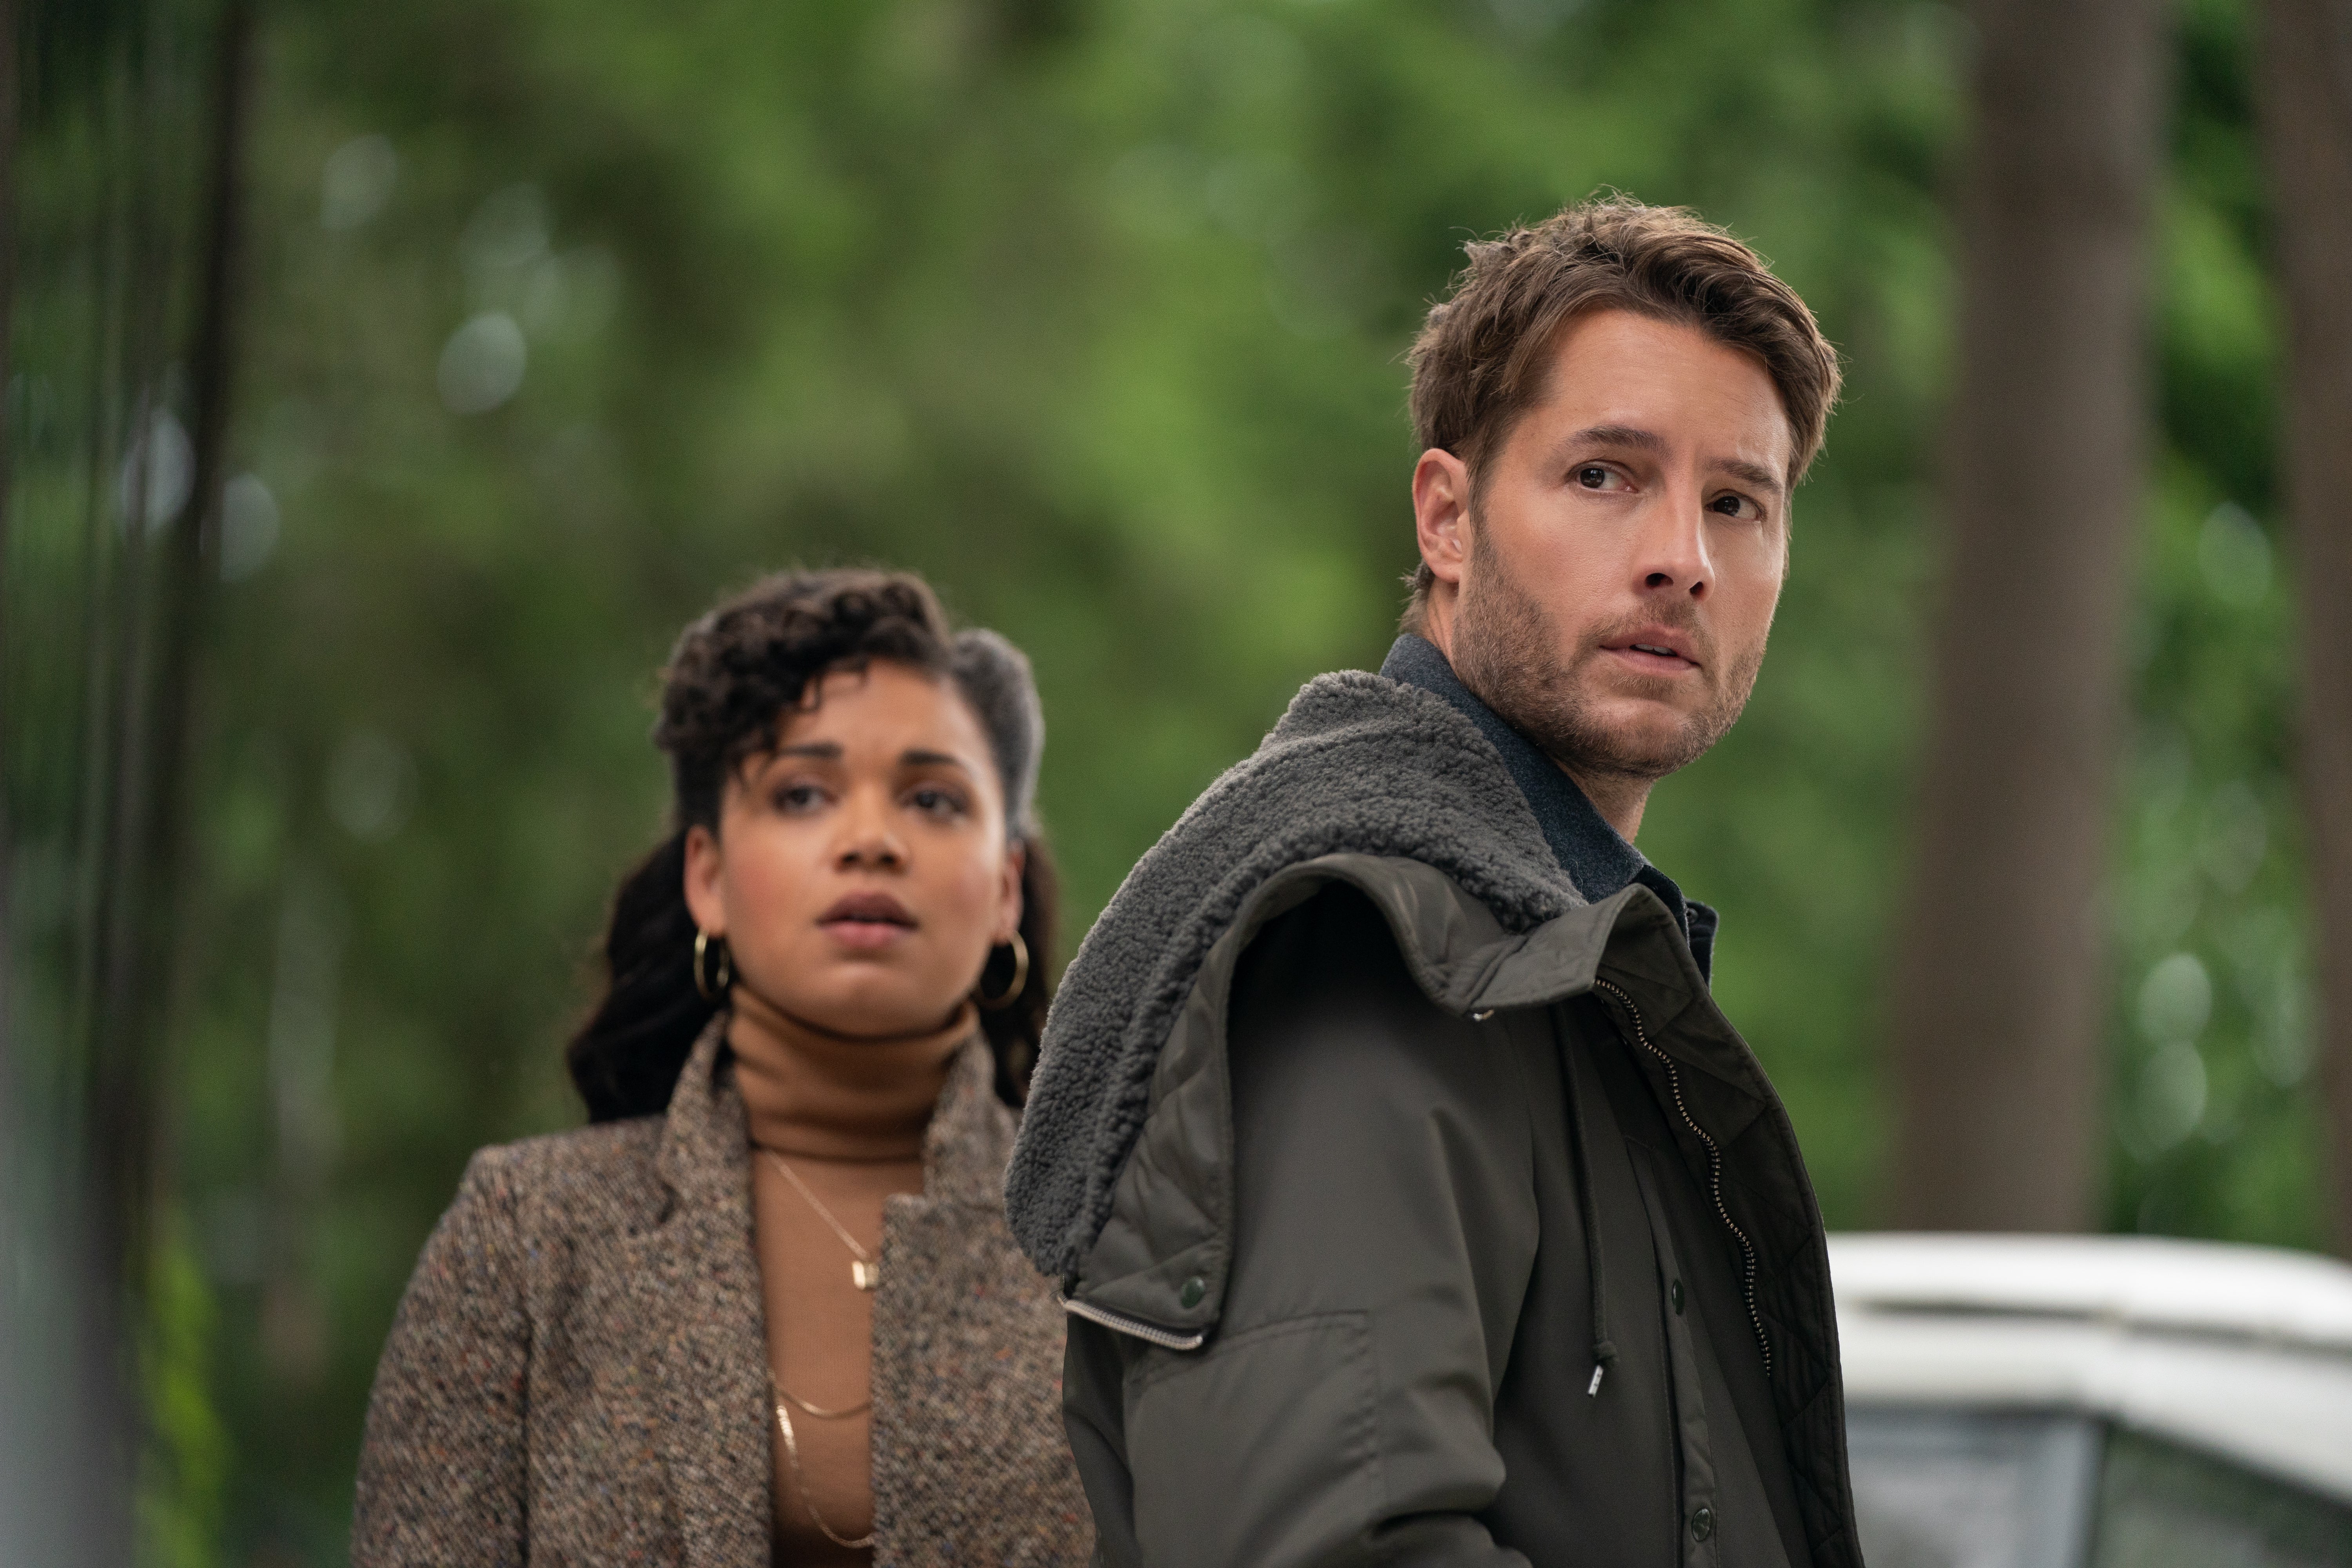 Barrett Doss and Justin Hartley in ‘The Noel Diary’